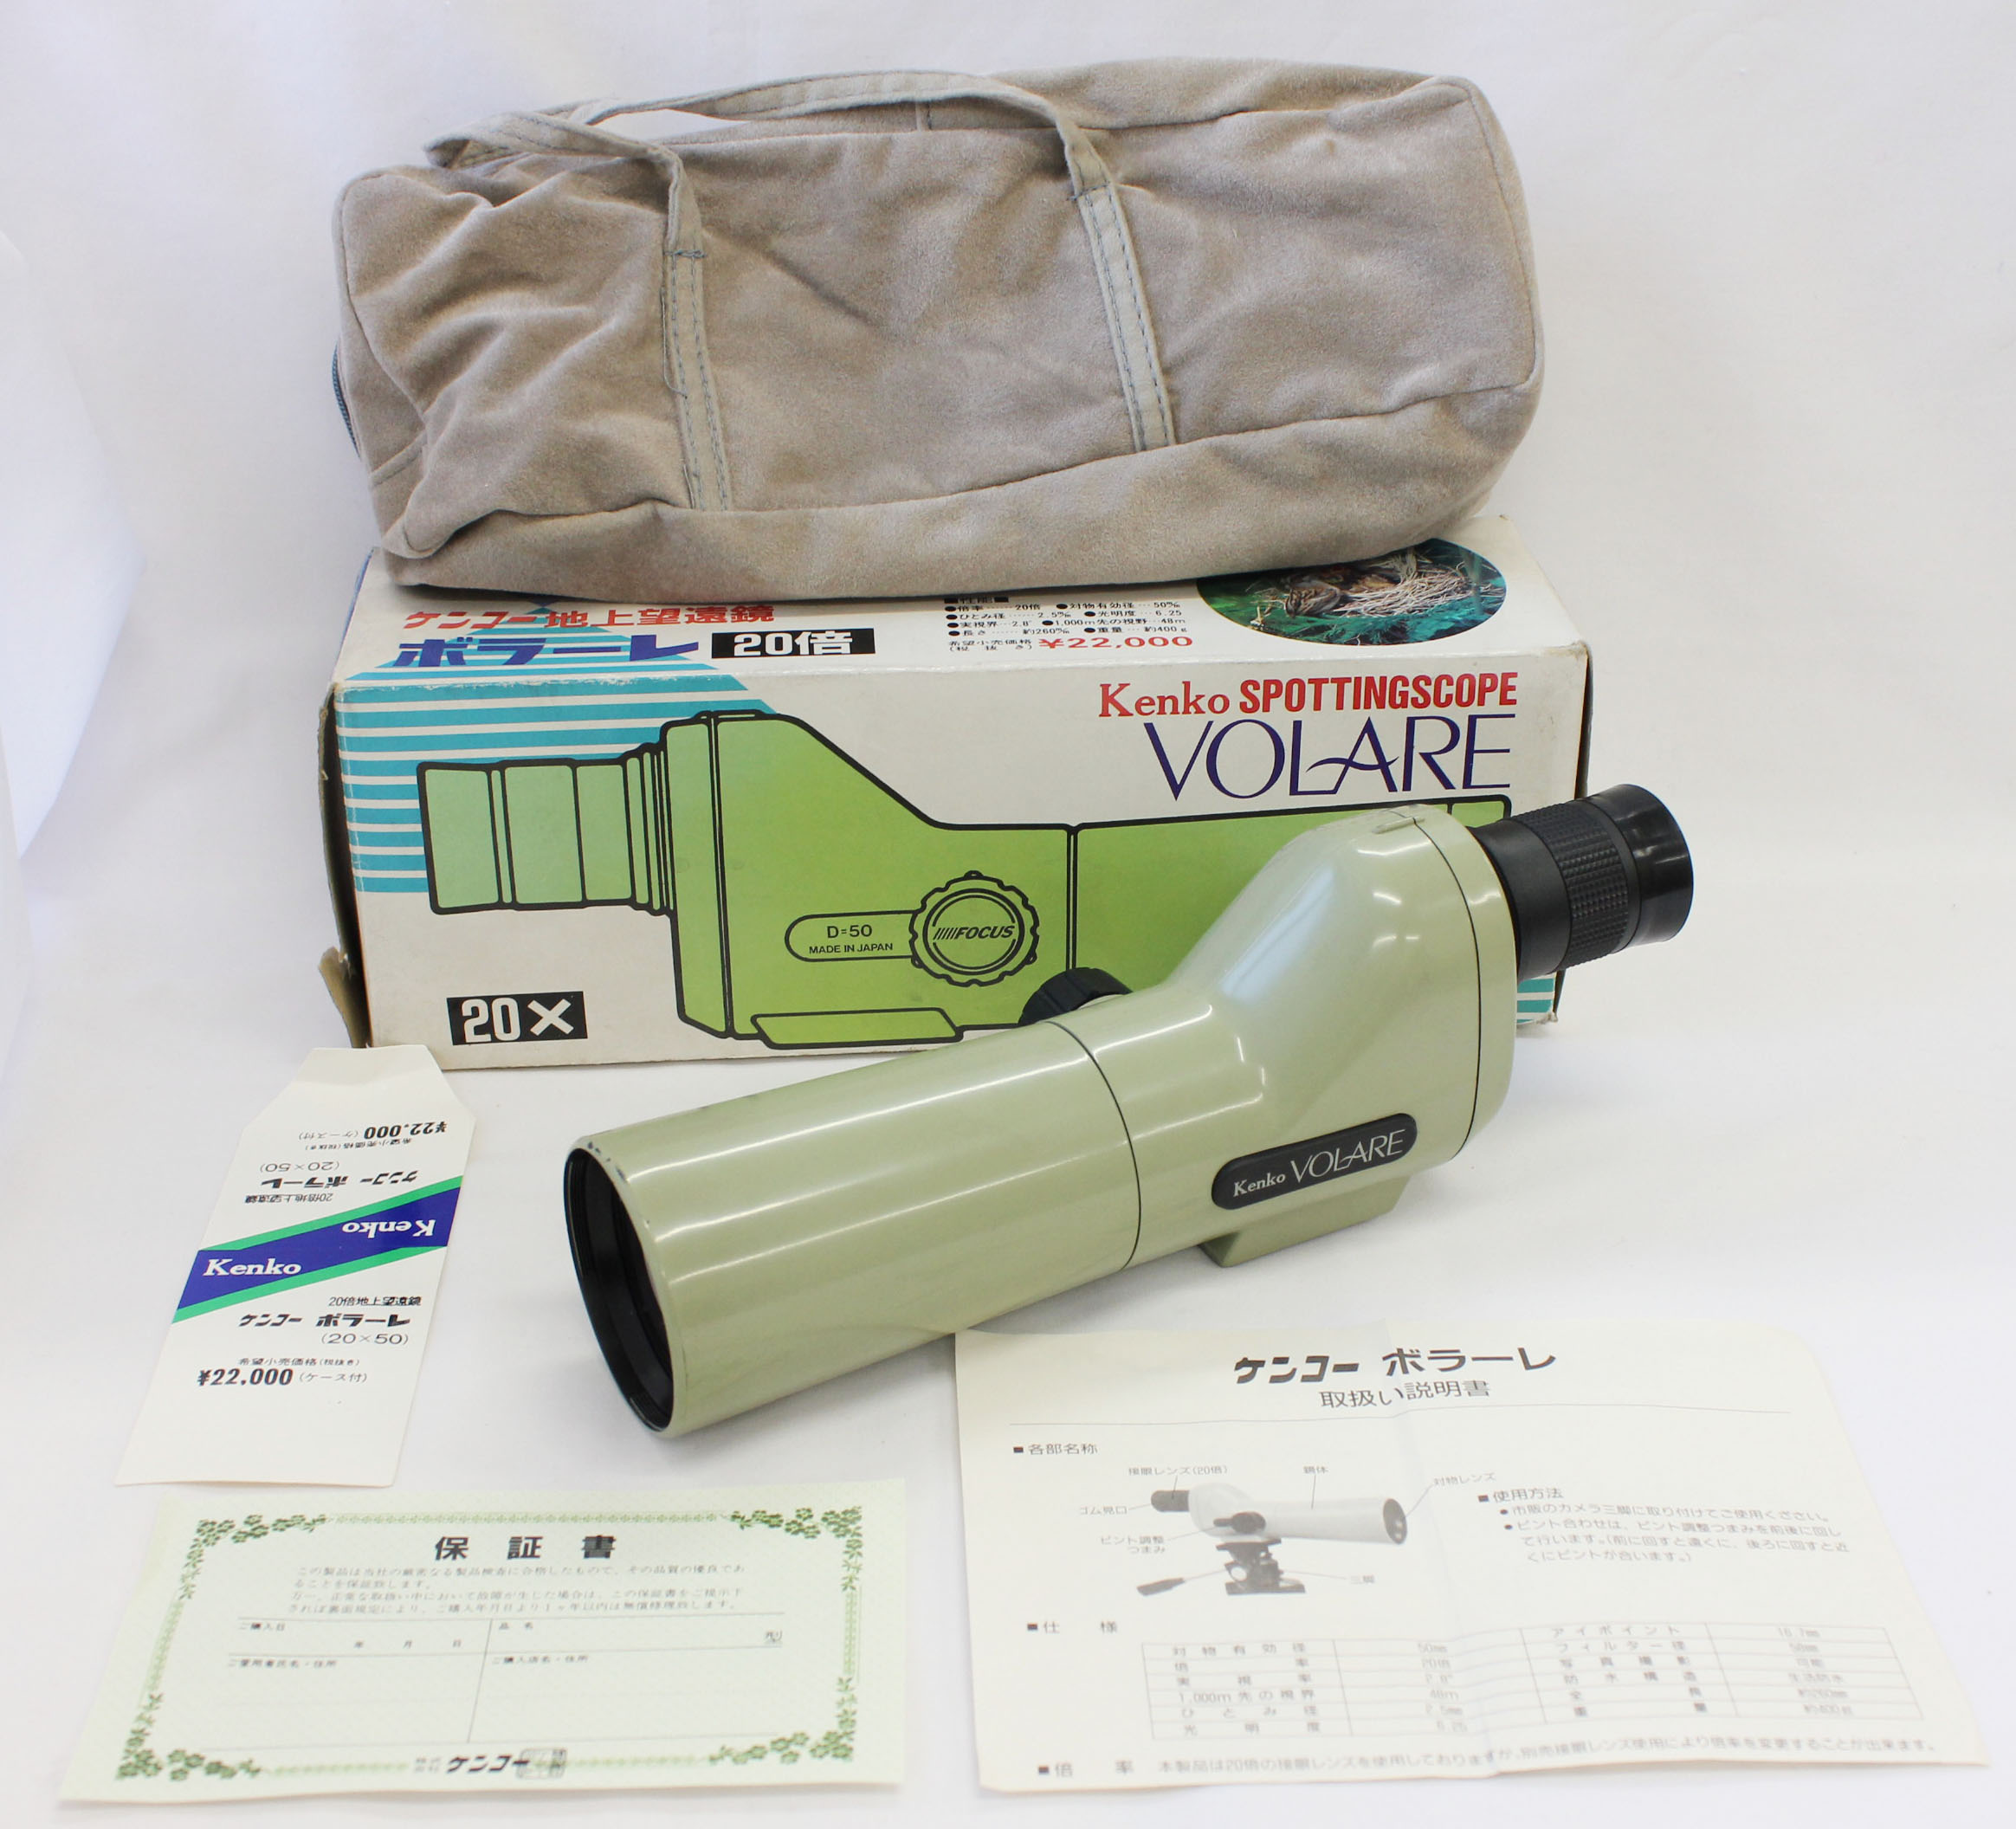 [Excellent+++++] Kenko Volare Spotting Scope 20x D=50 in Case/Box from Japan